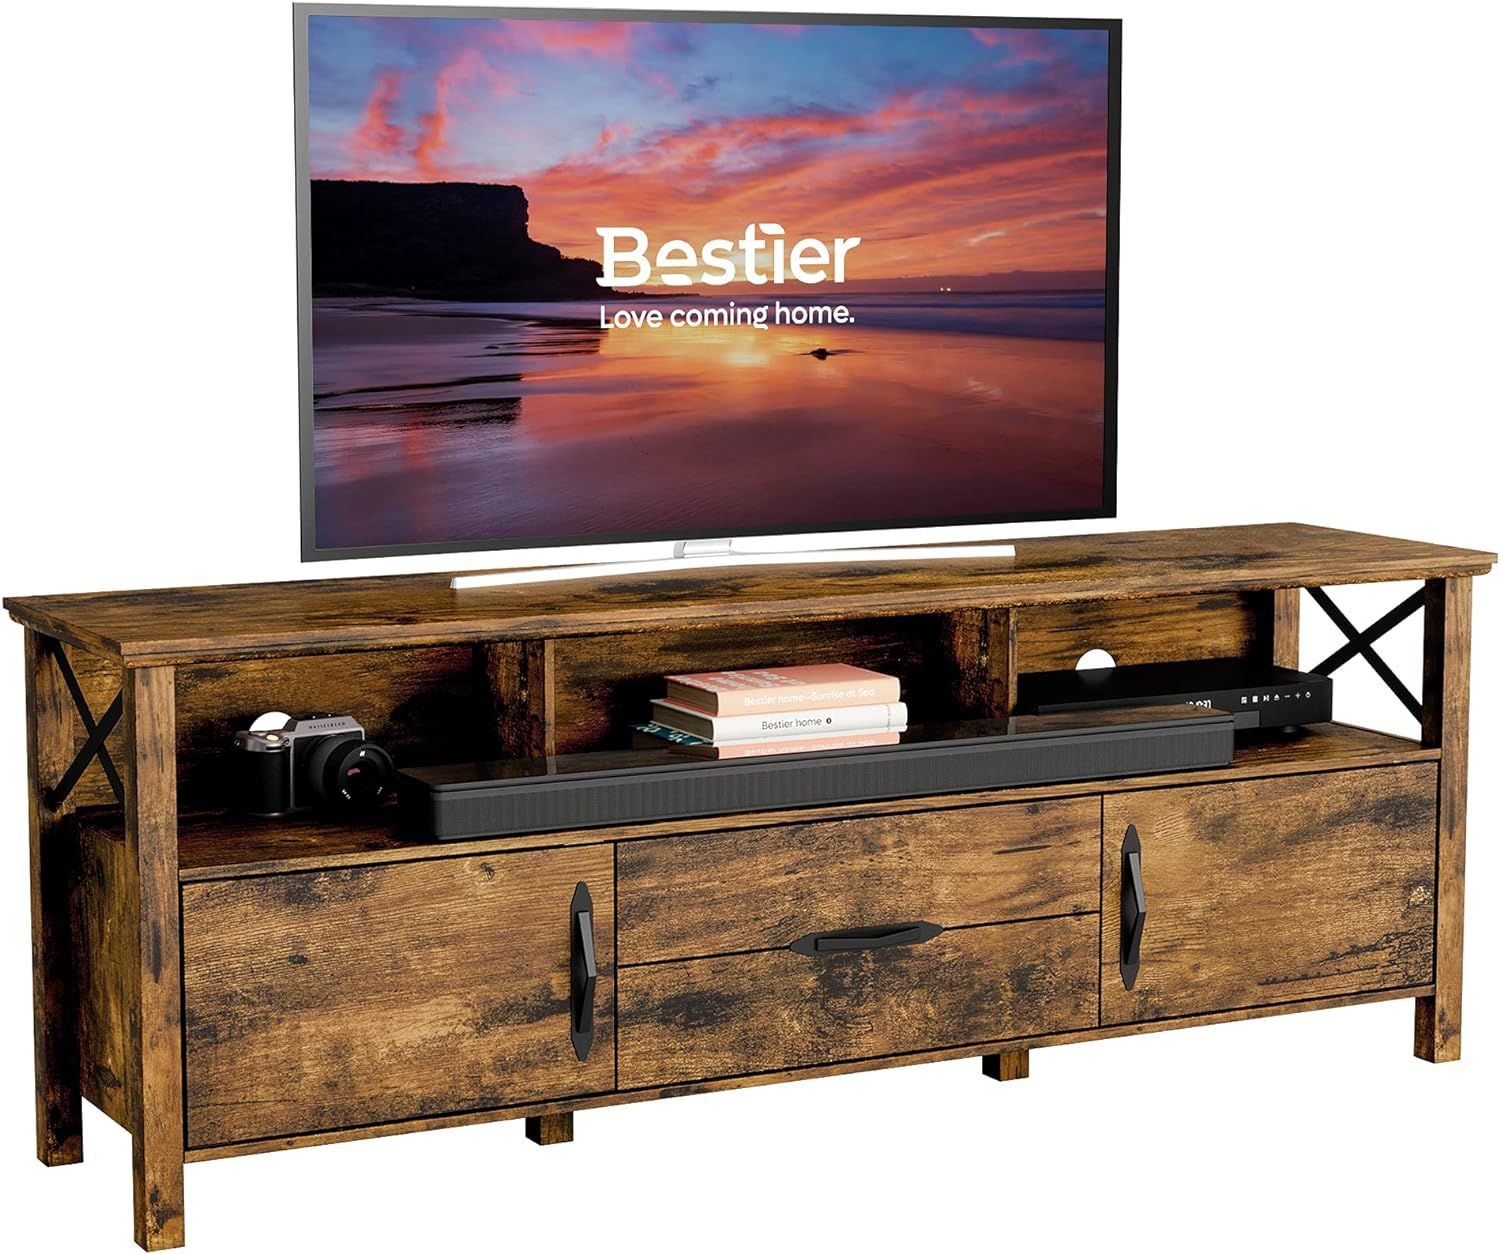 Bestier Tv Stand For Tv Up To 75 Inch, Farmhouse India | Ubuy With Regard To Bestier Tv Stand For Tvs Up To 75&quot; (View 14 of 15)